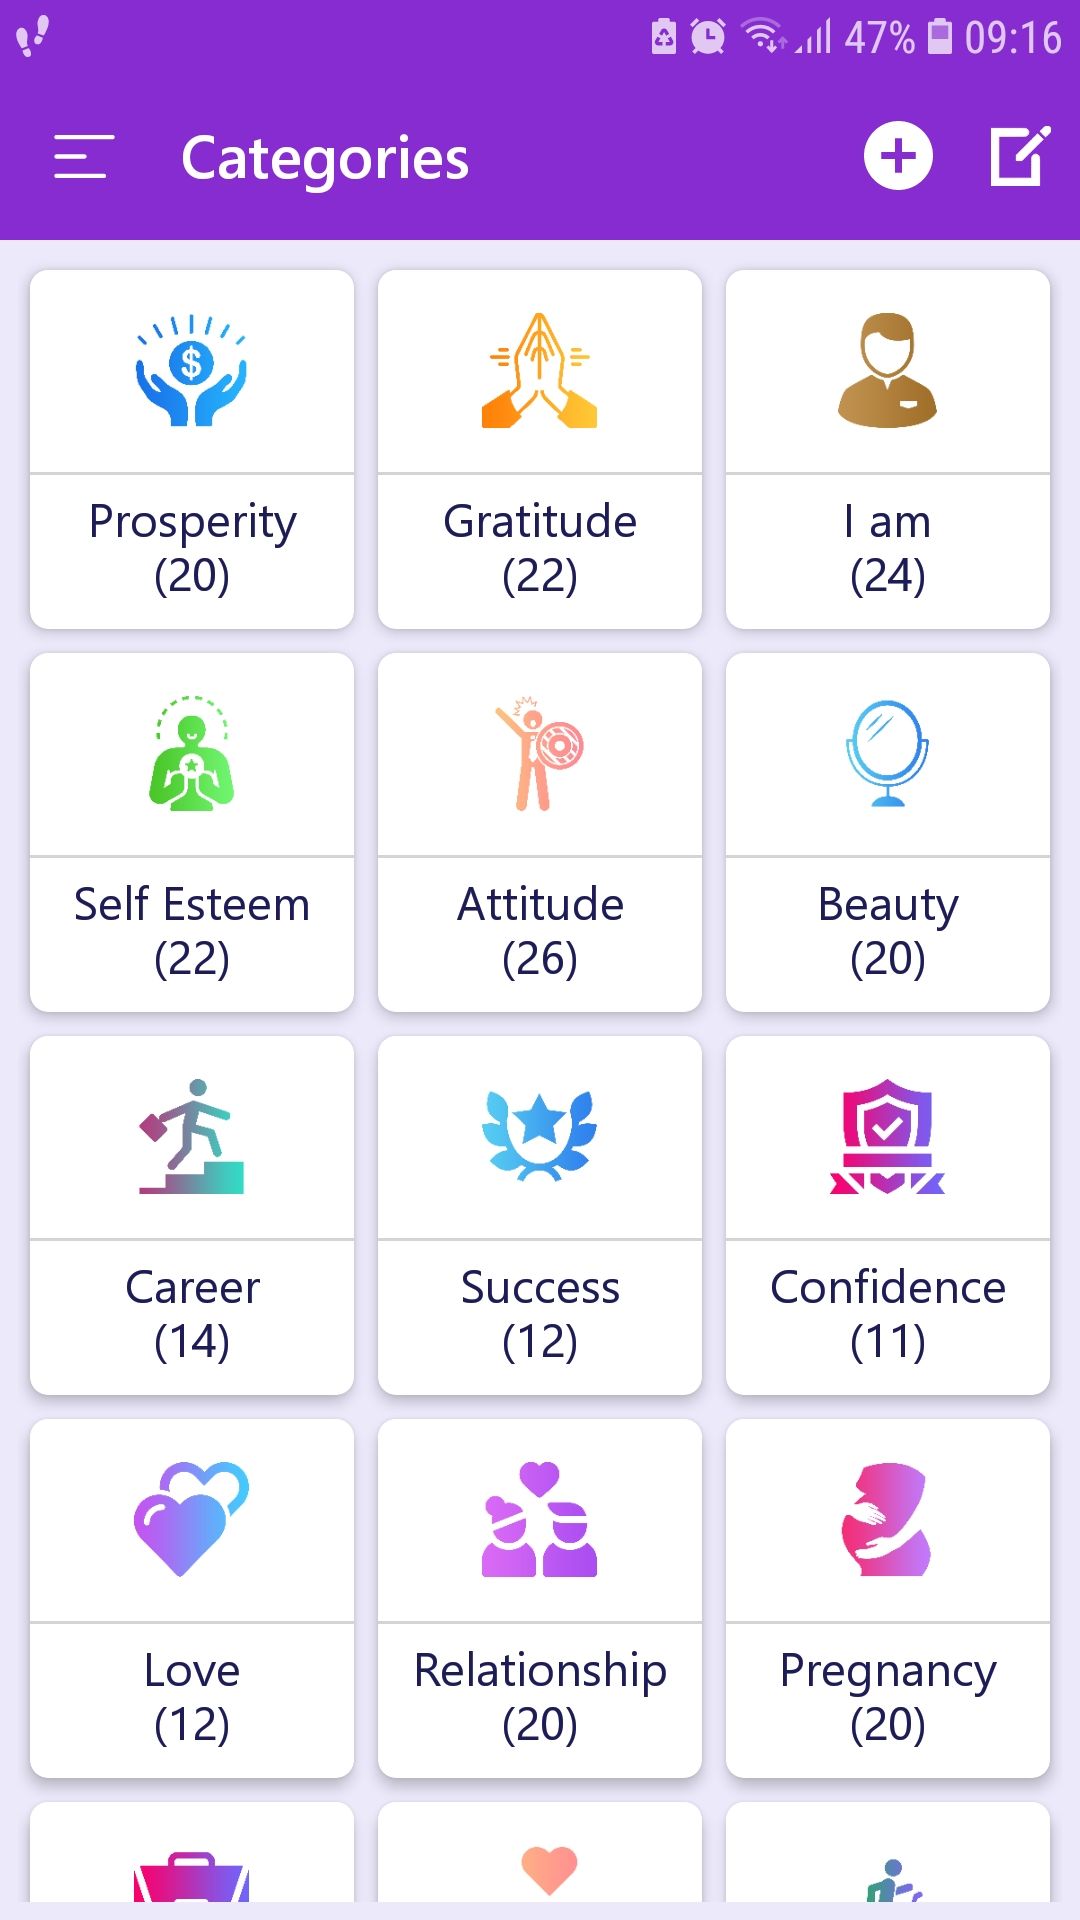 Daily Affirmation mobile positivity app categories